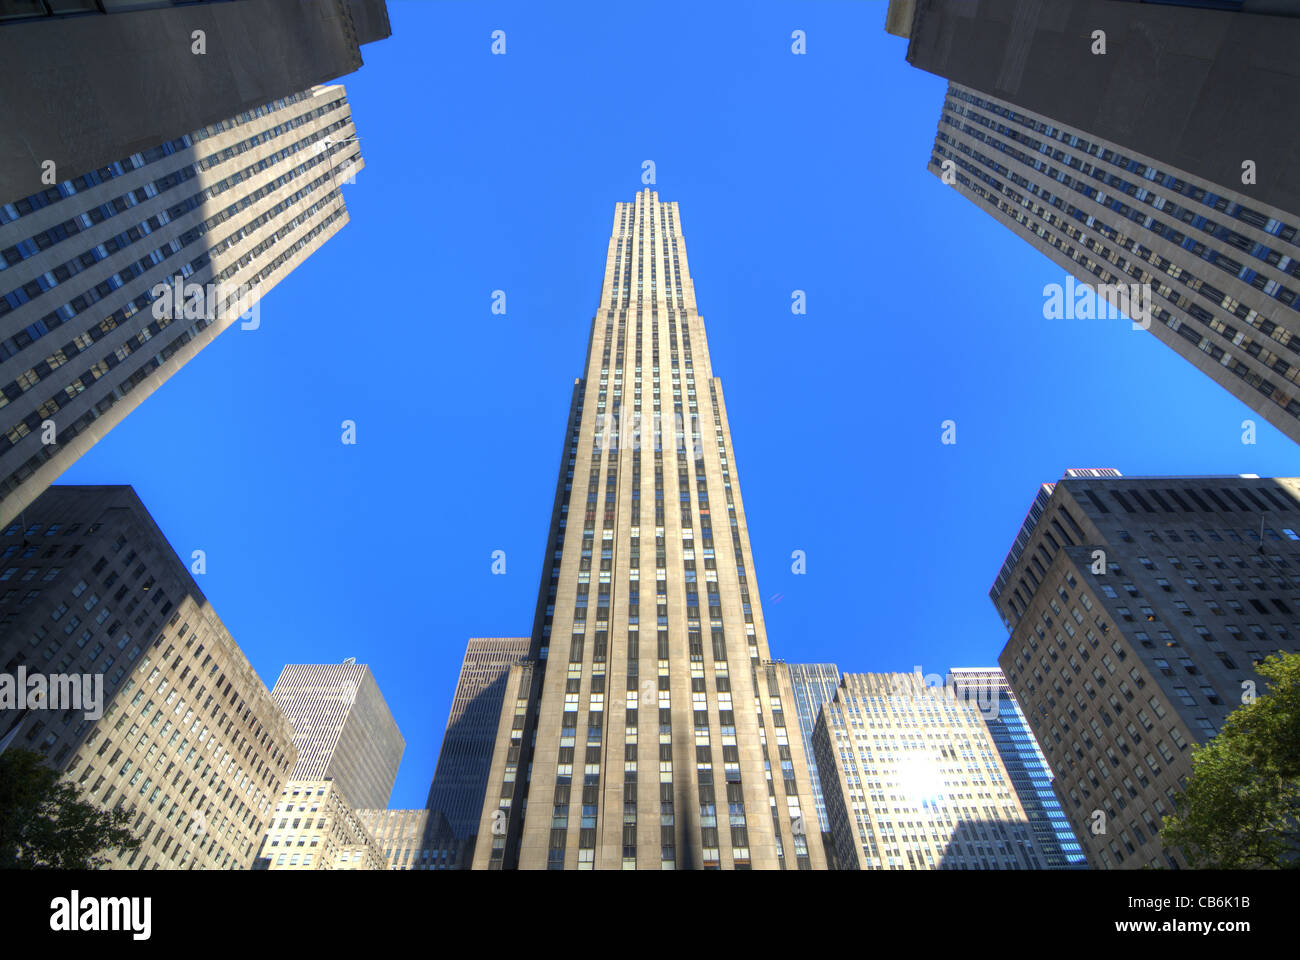 The World Famous GE Building at Rockefeller Center in New York City. Stock Photo